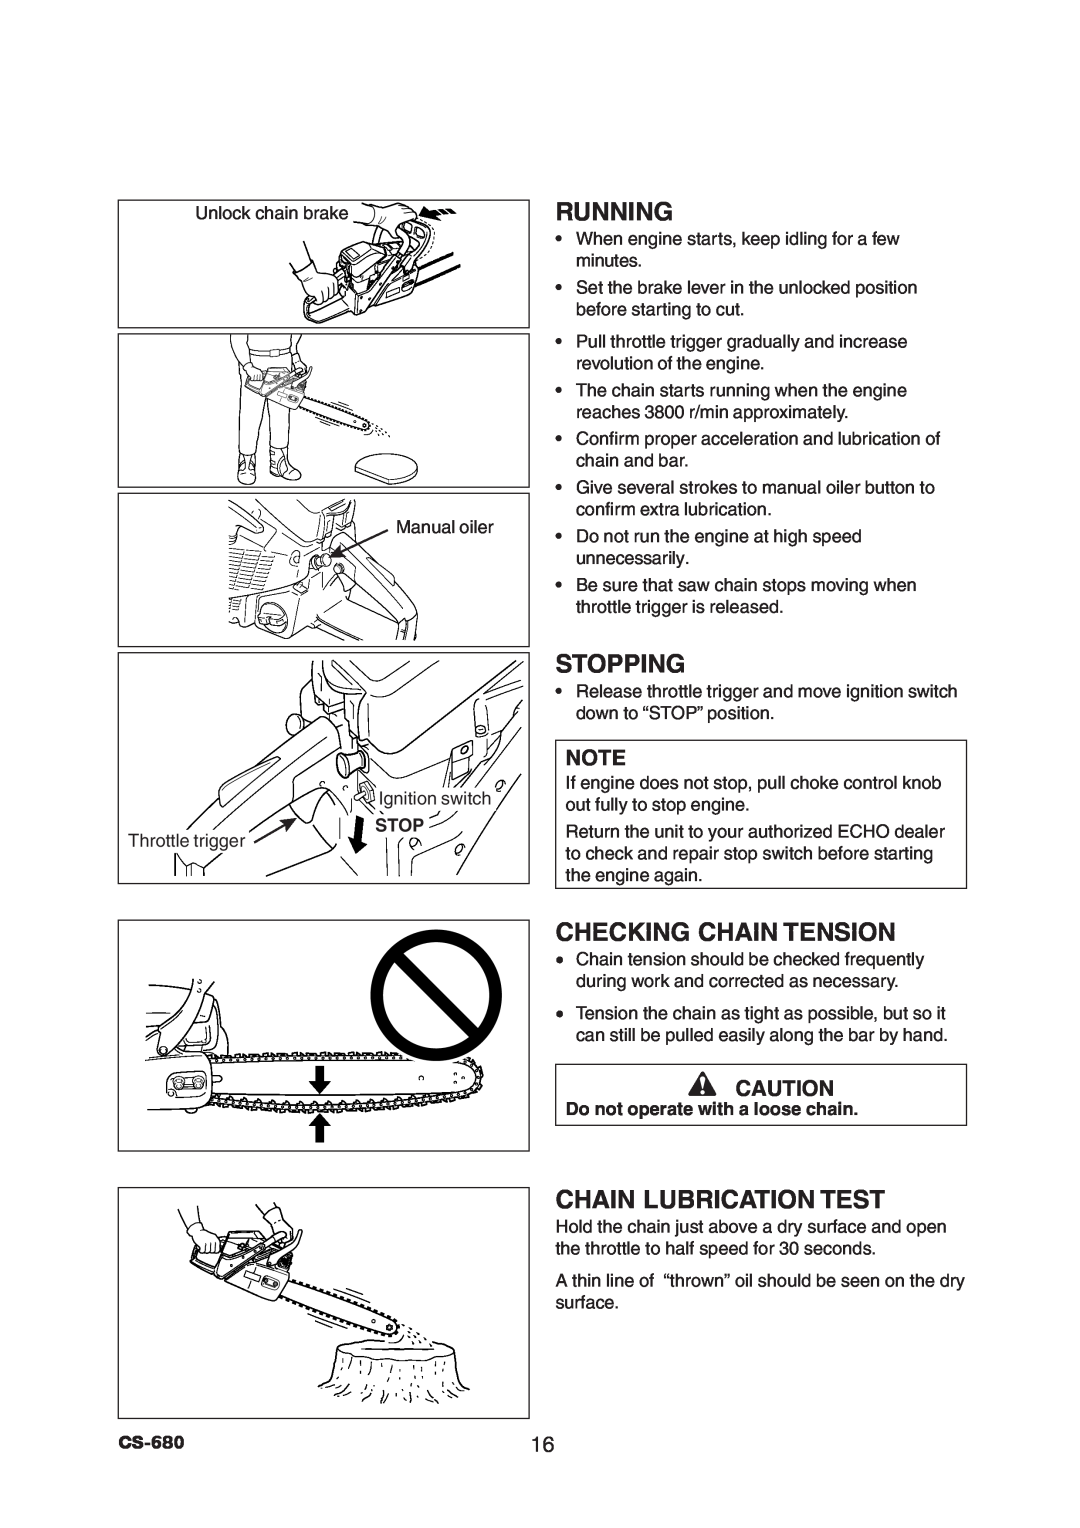 Echo CS-680 instruction manual Running, Stopping, Checking Chain Tension, Chain Lubrication Test 